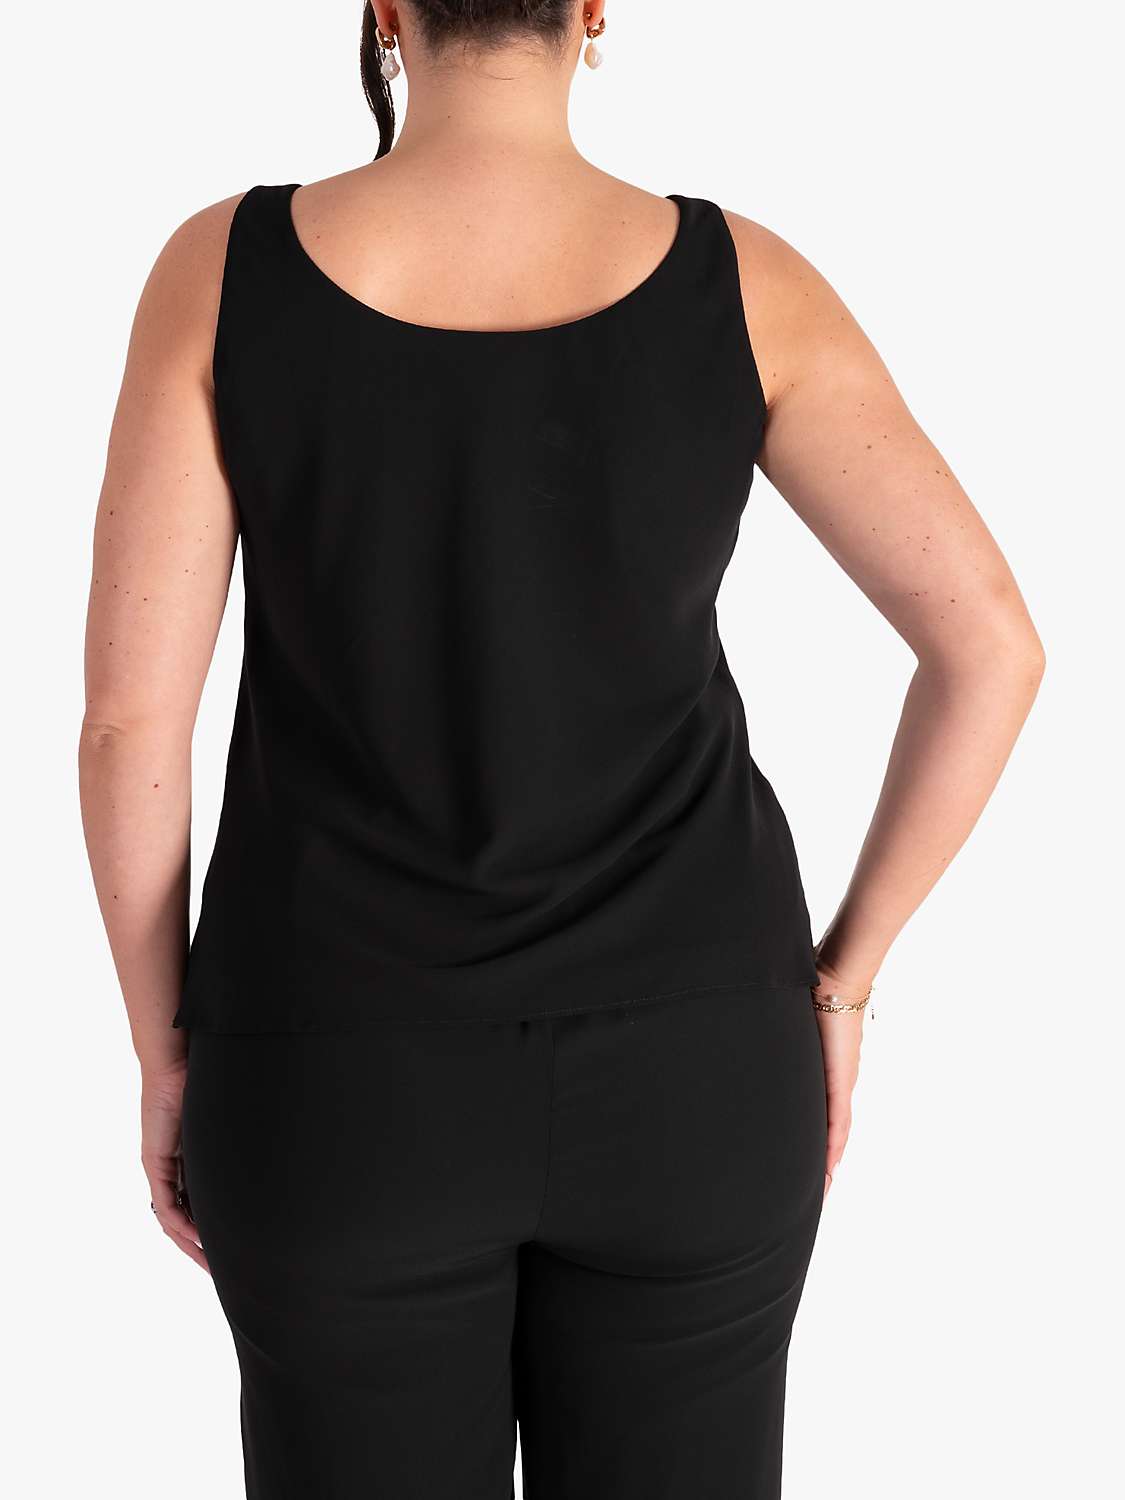 Buy chesca Chiffon Camisole Top Online at johnlewis.com